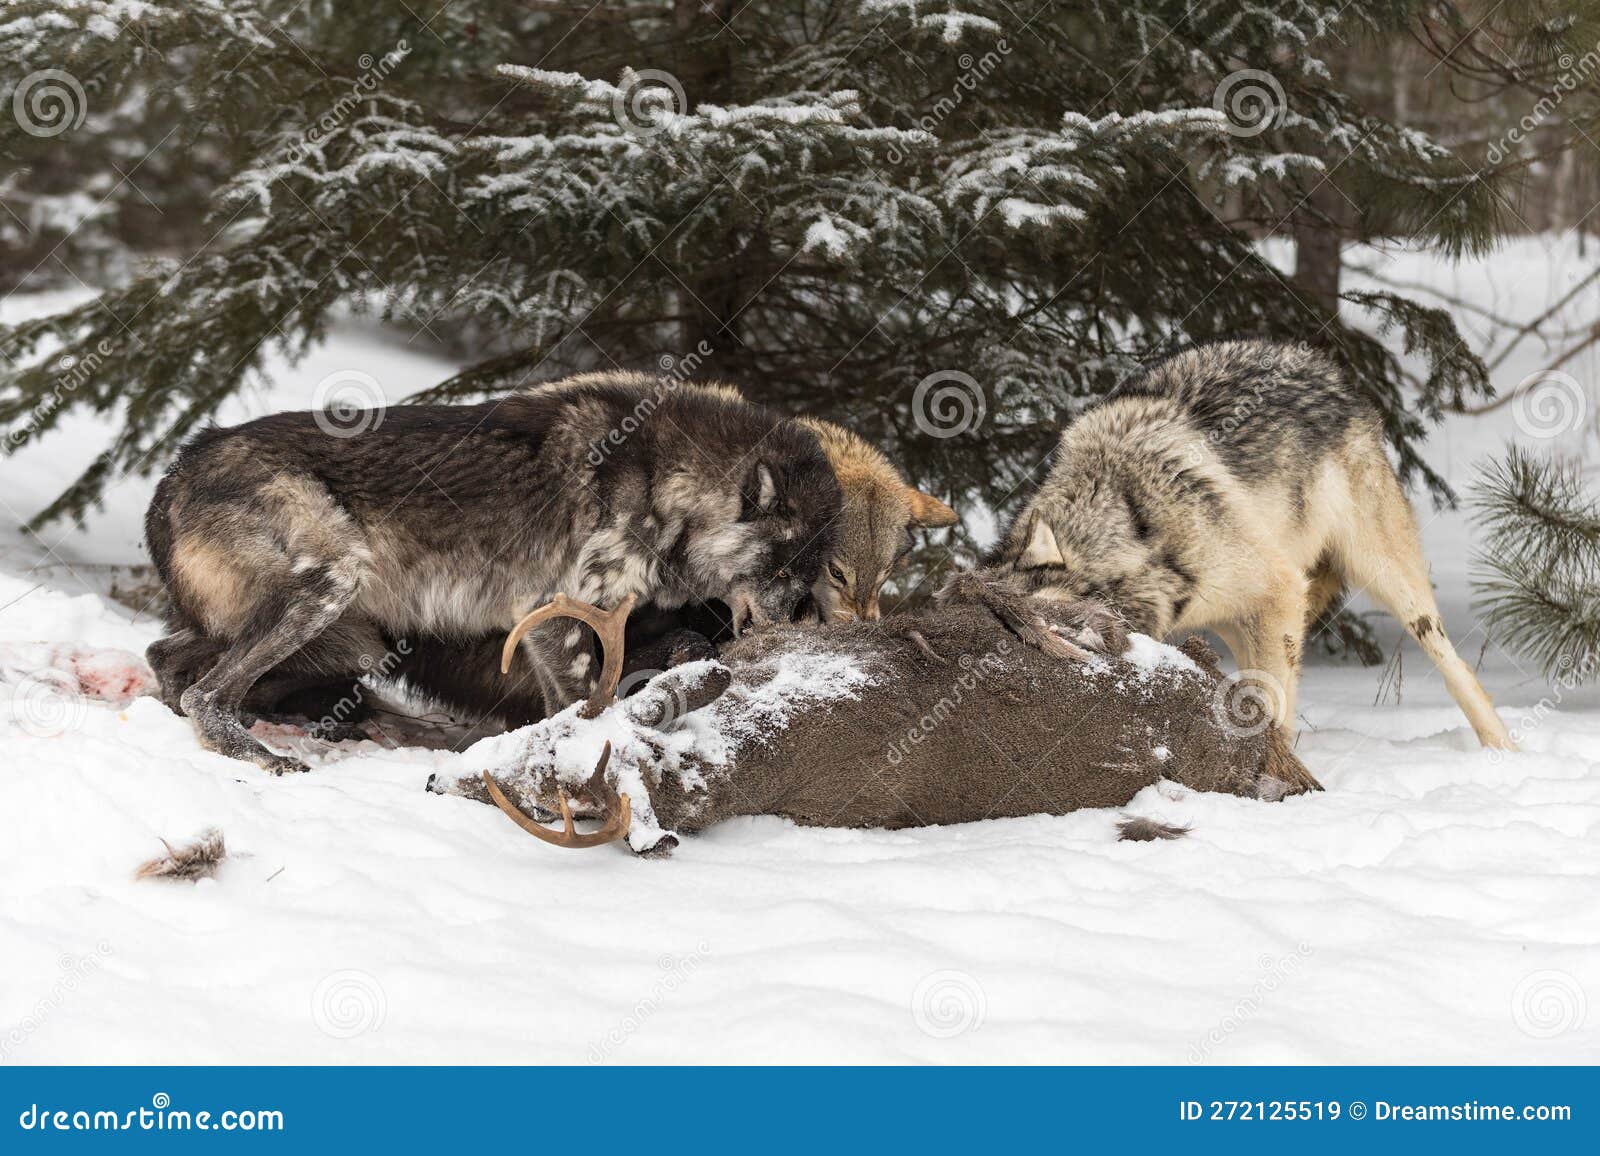 wolf (canis lupus) pack snarl at each other at white-tail deer body winter